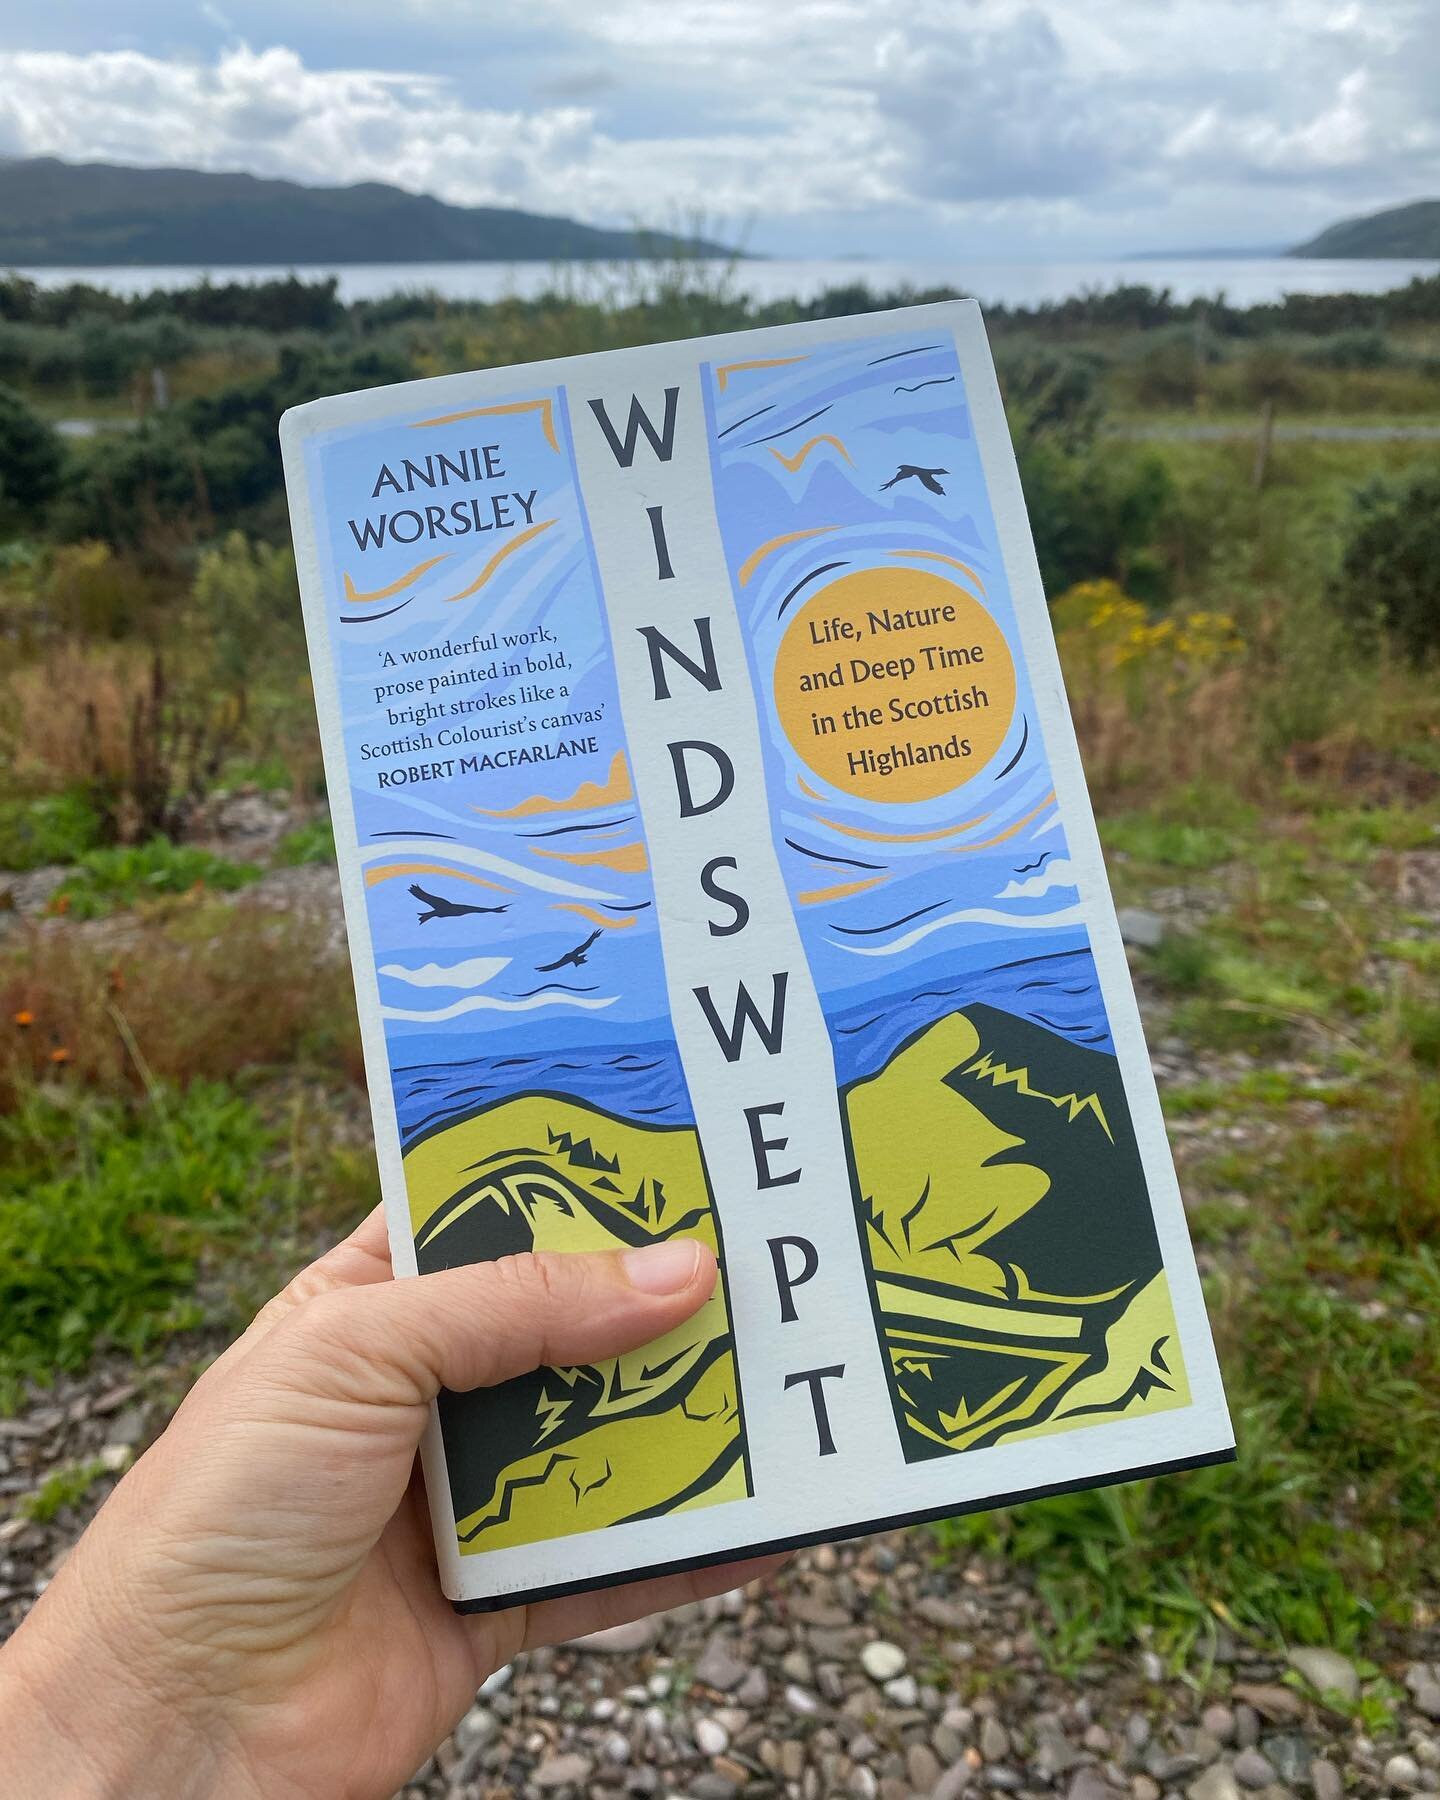 Annie Worsley&rsquo;s Windswept is an immersive riot of West Highland smells, sounds and colours. It&rsquo;s a staggeringly beautiful book documenting what&rsquo;s revealed over a year of sunrises and sunsets on her West Highland croft. 

&ldquo;The 